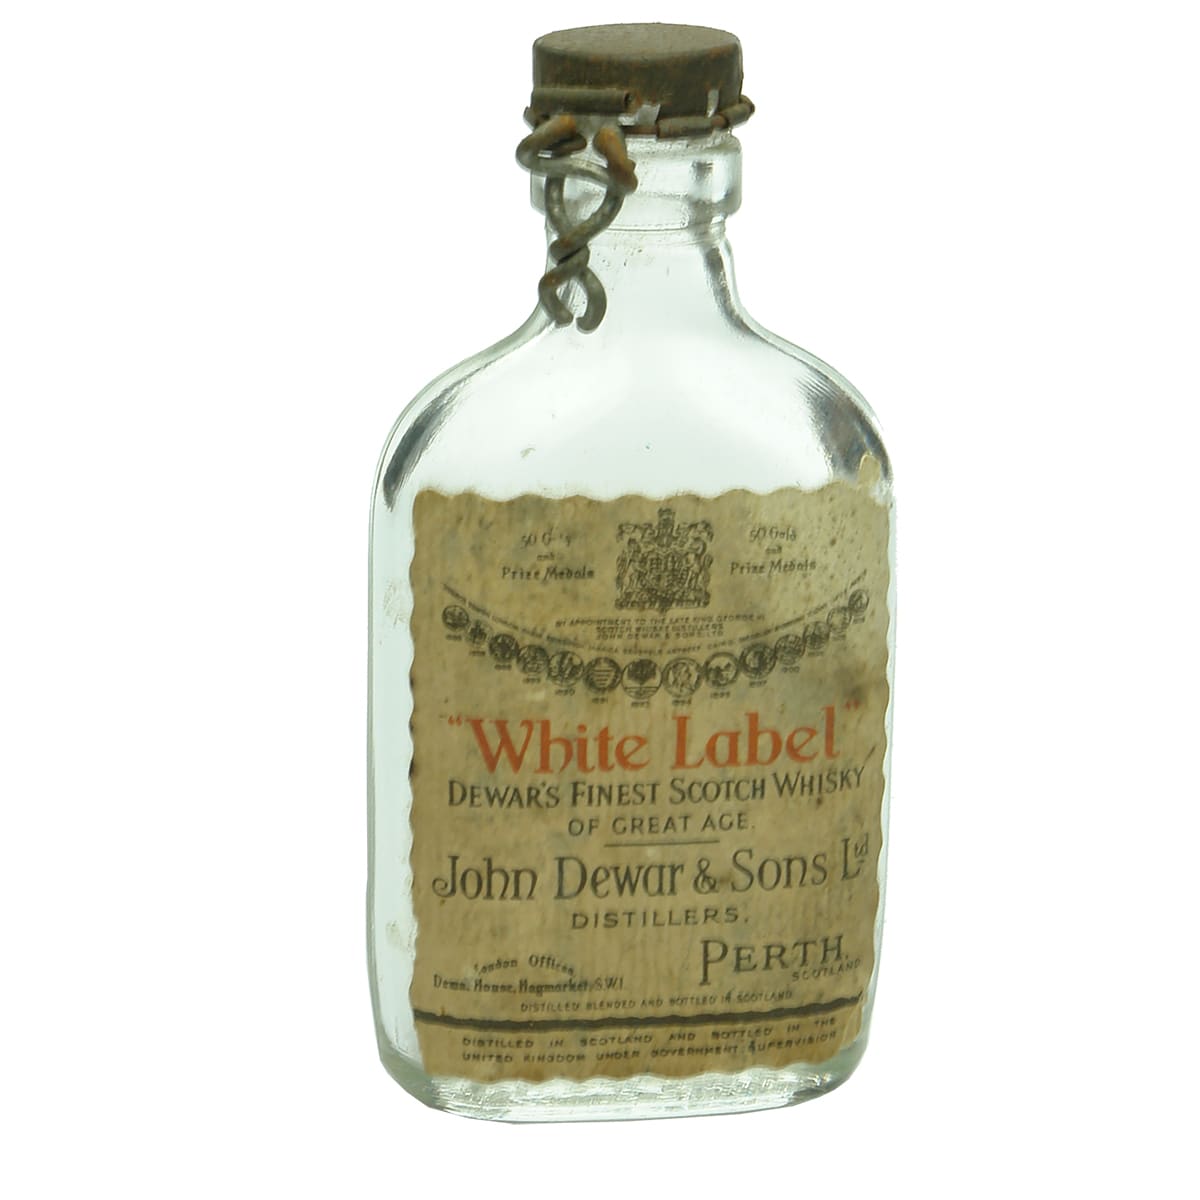 Sample labelled White Label Whisky. Patent closure & Cap.